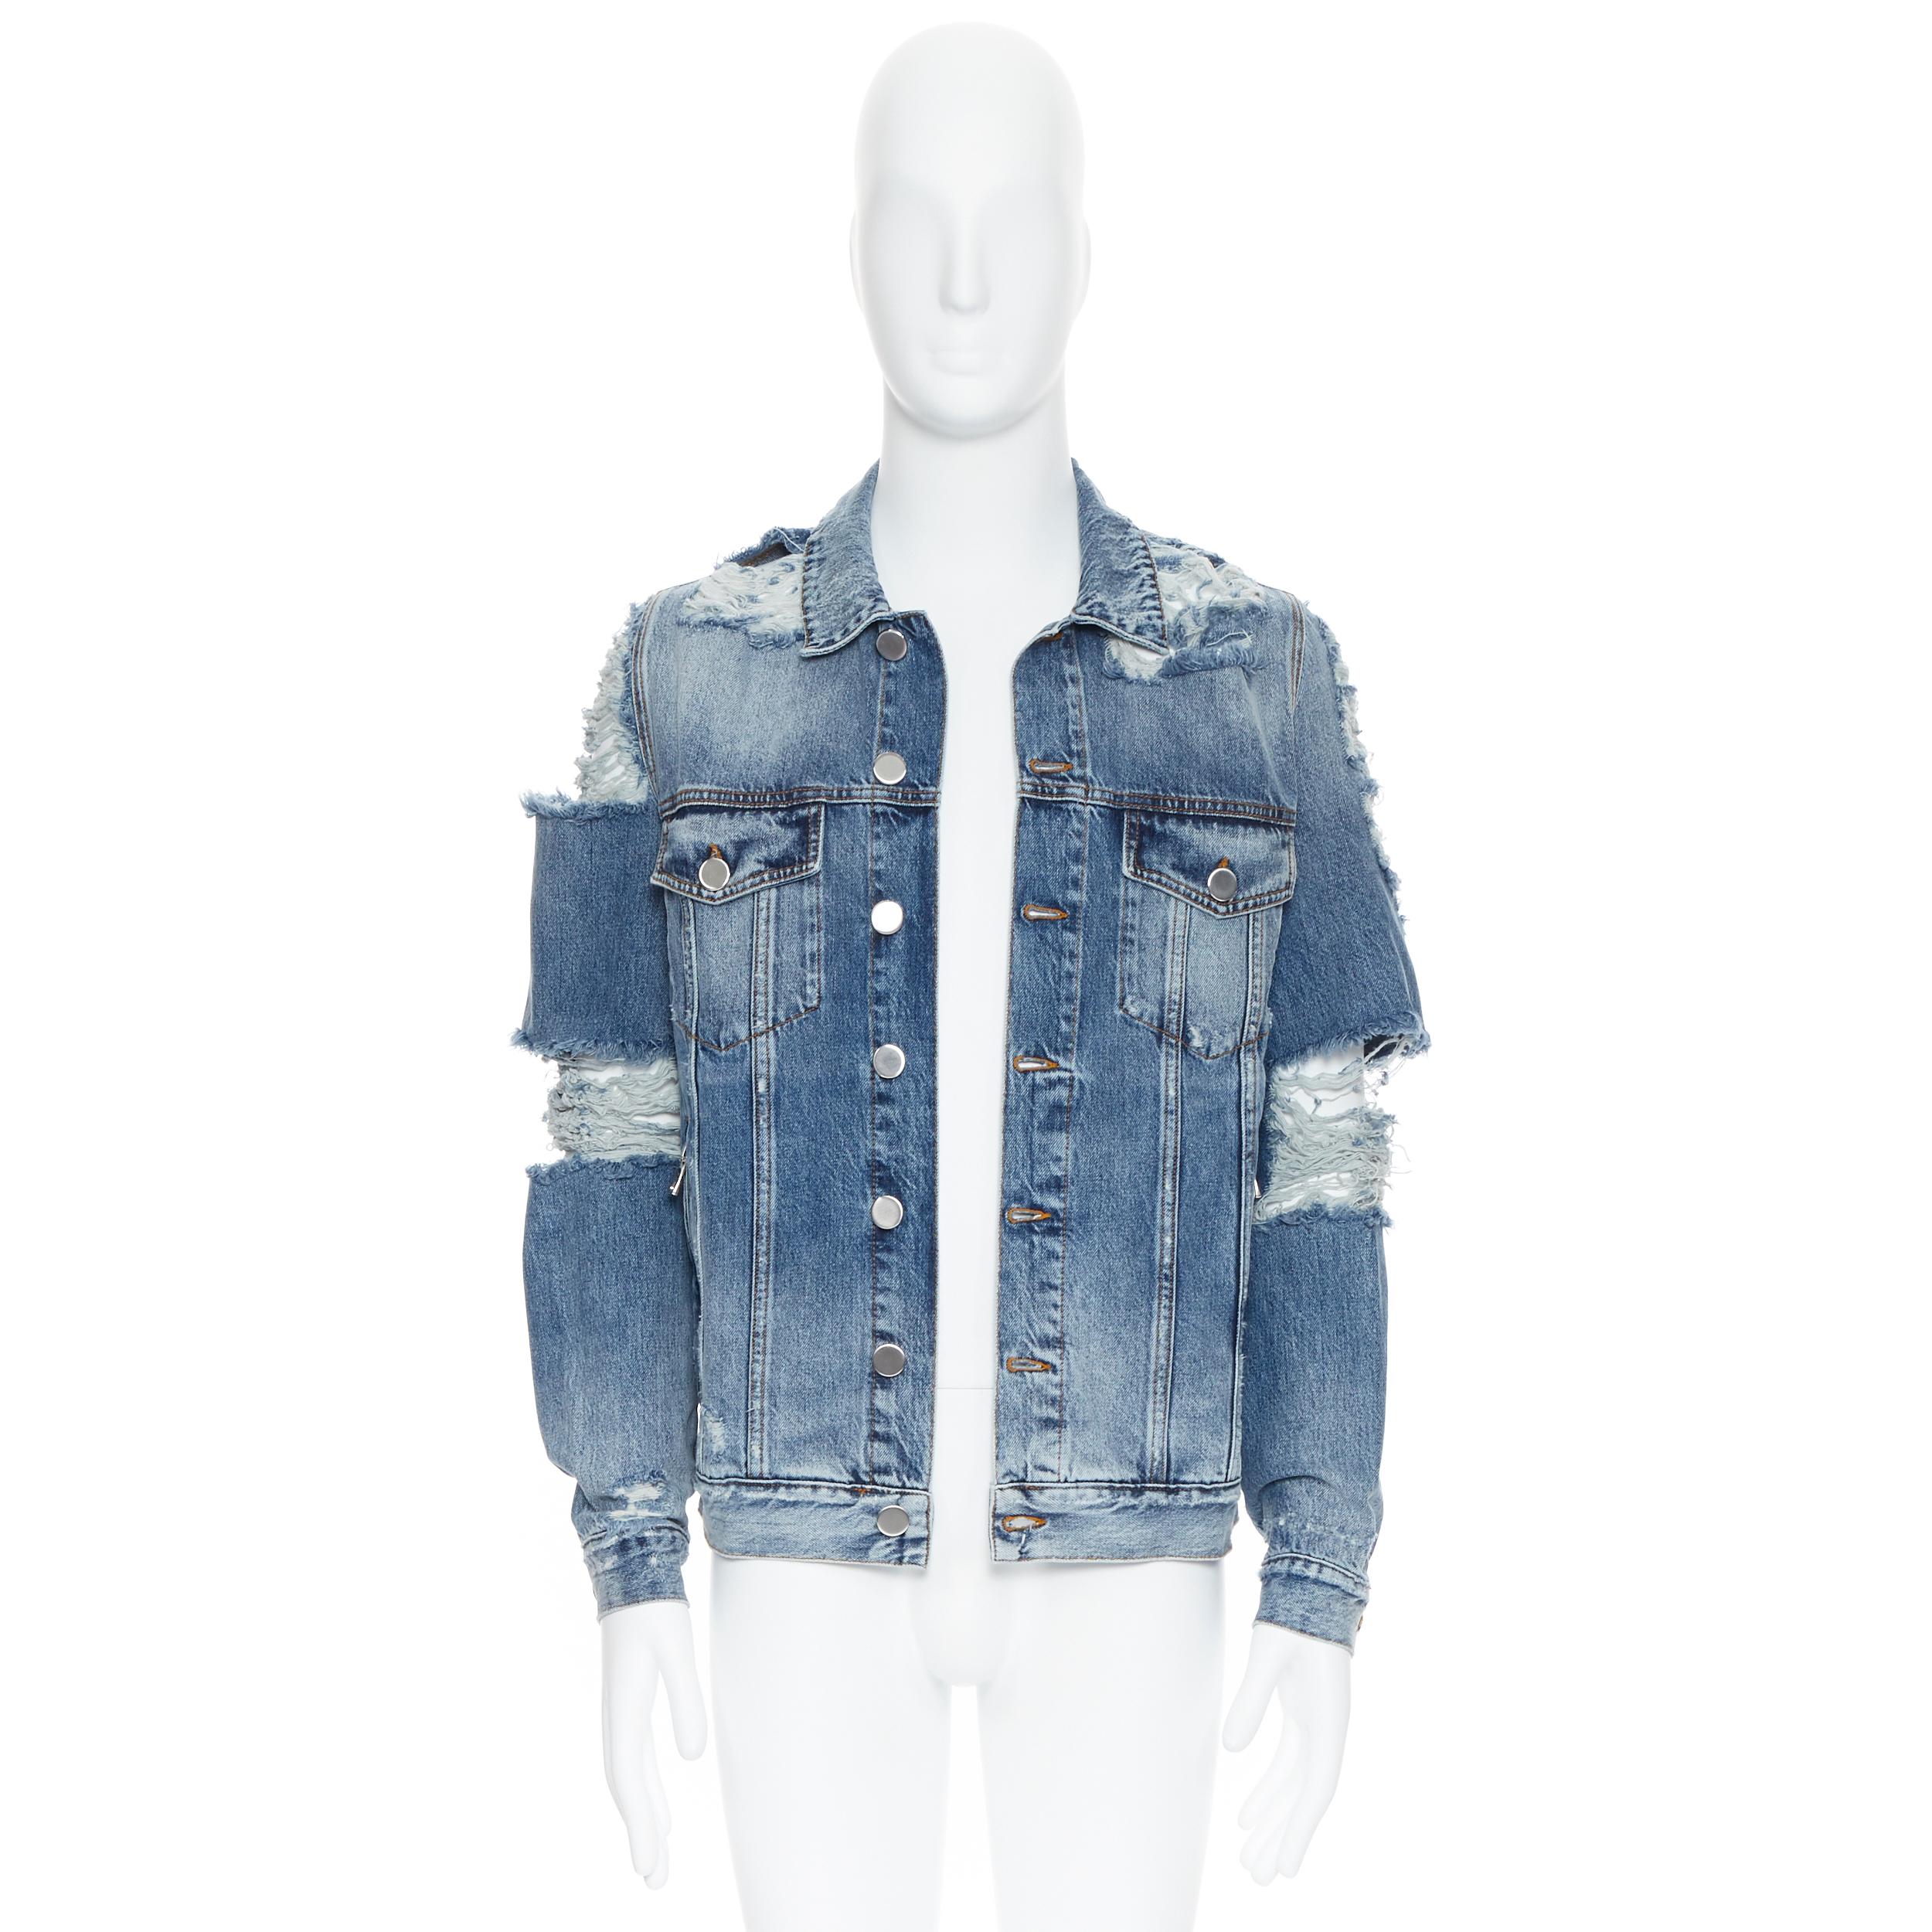 new BALMAIN blue washed heavy distressed holey casual denim trucker jacket S
Brand: Balmain
Designer: Olivier Rousteing
Model Name / Style: Denim jacket
Material: Cotton
Color: Blue
Pattern: Solid
Closure: Button
Extra Detail: BALMAIN style code: